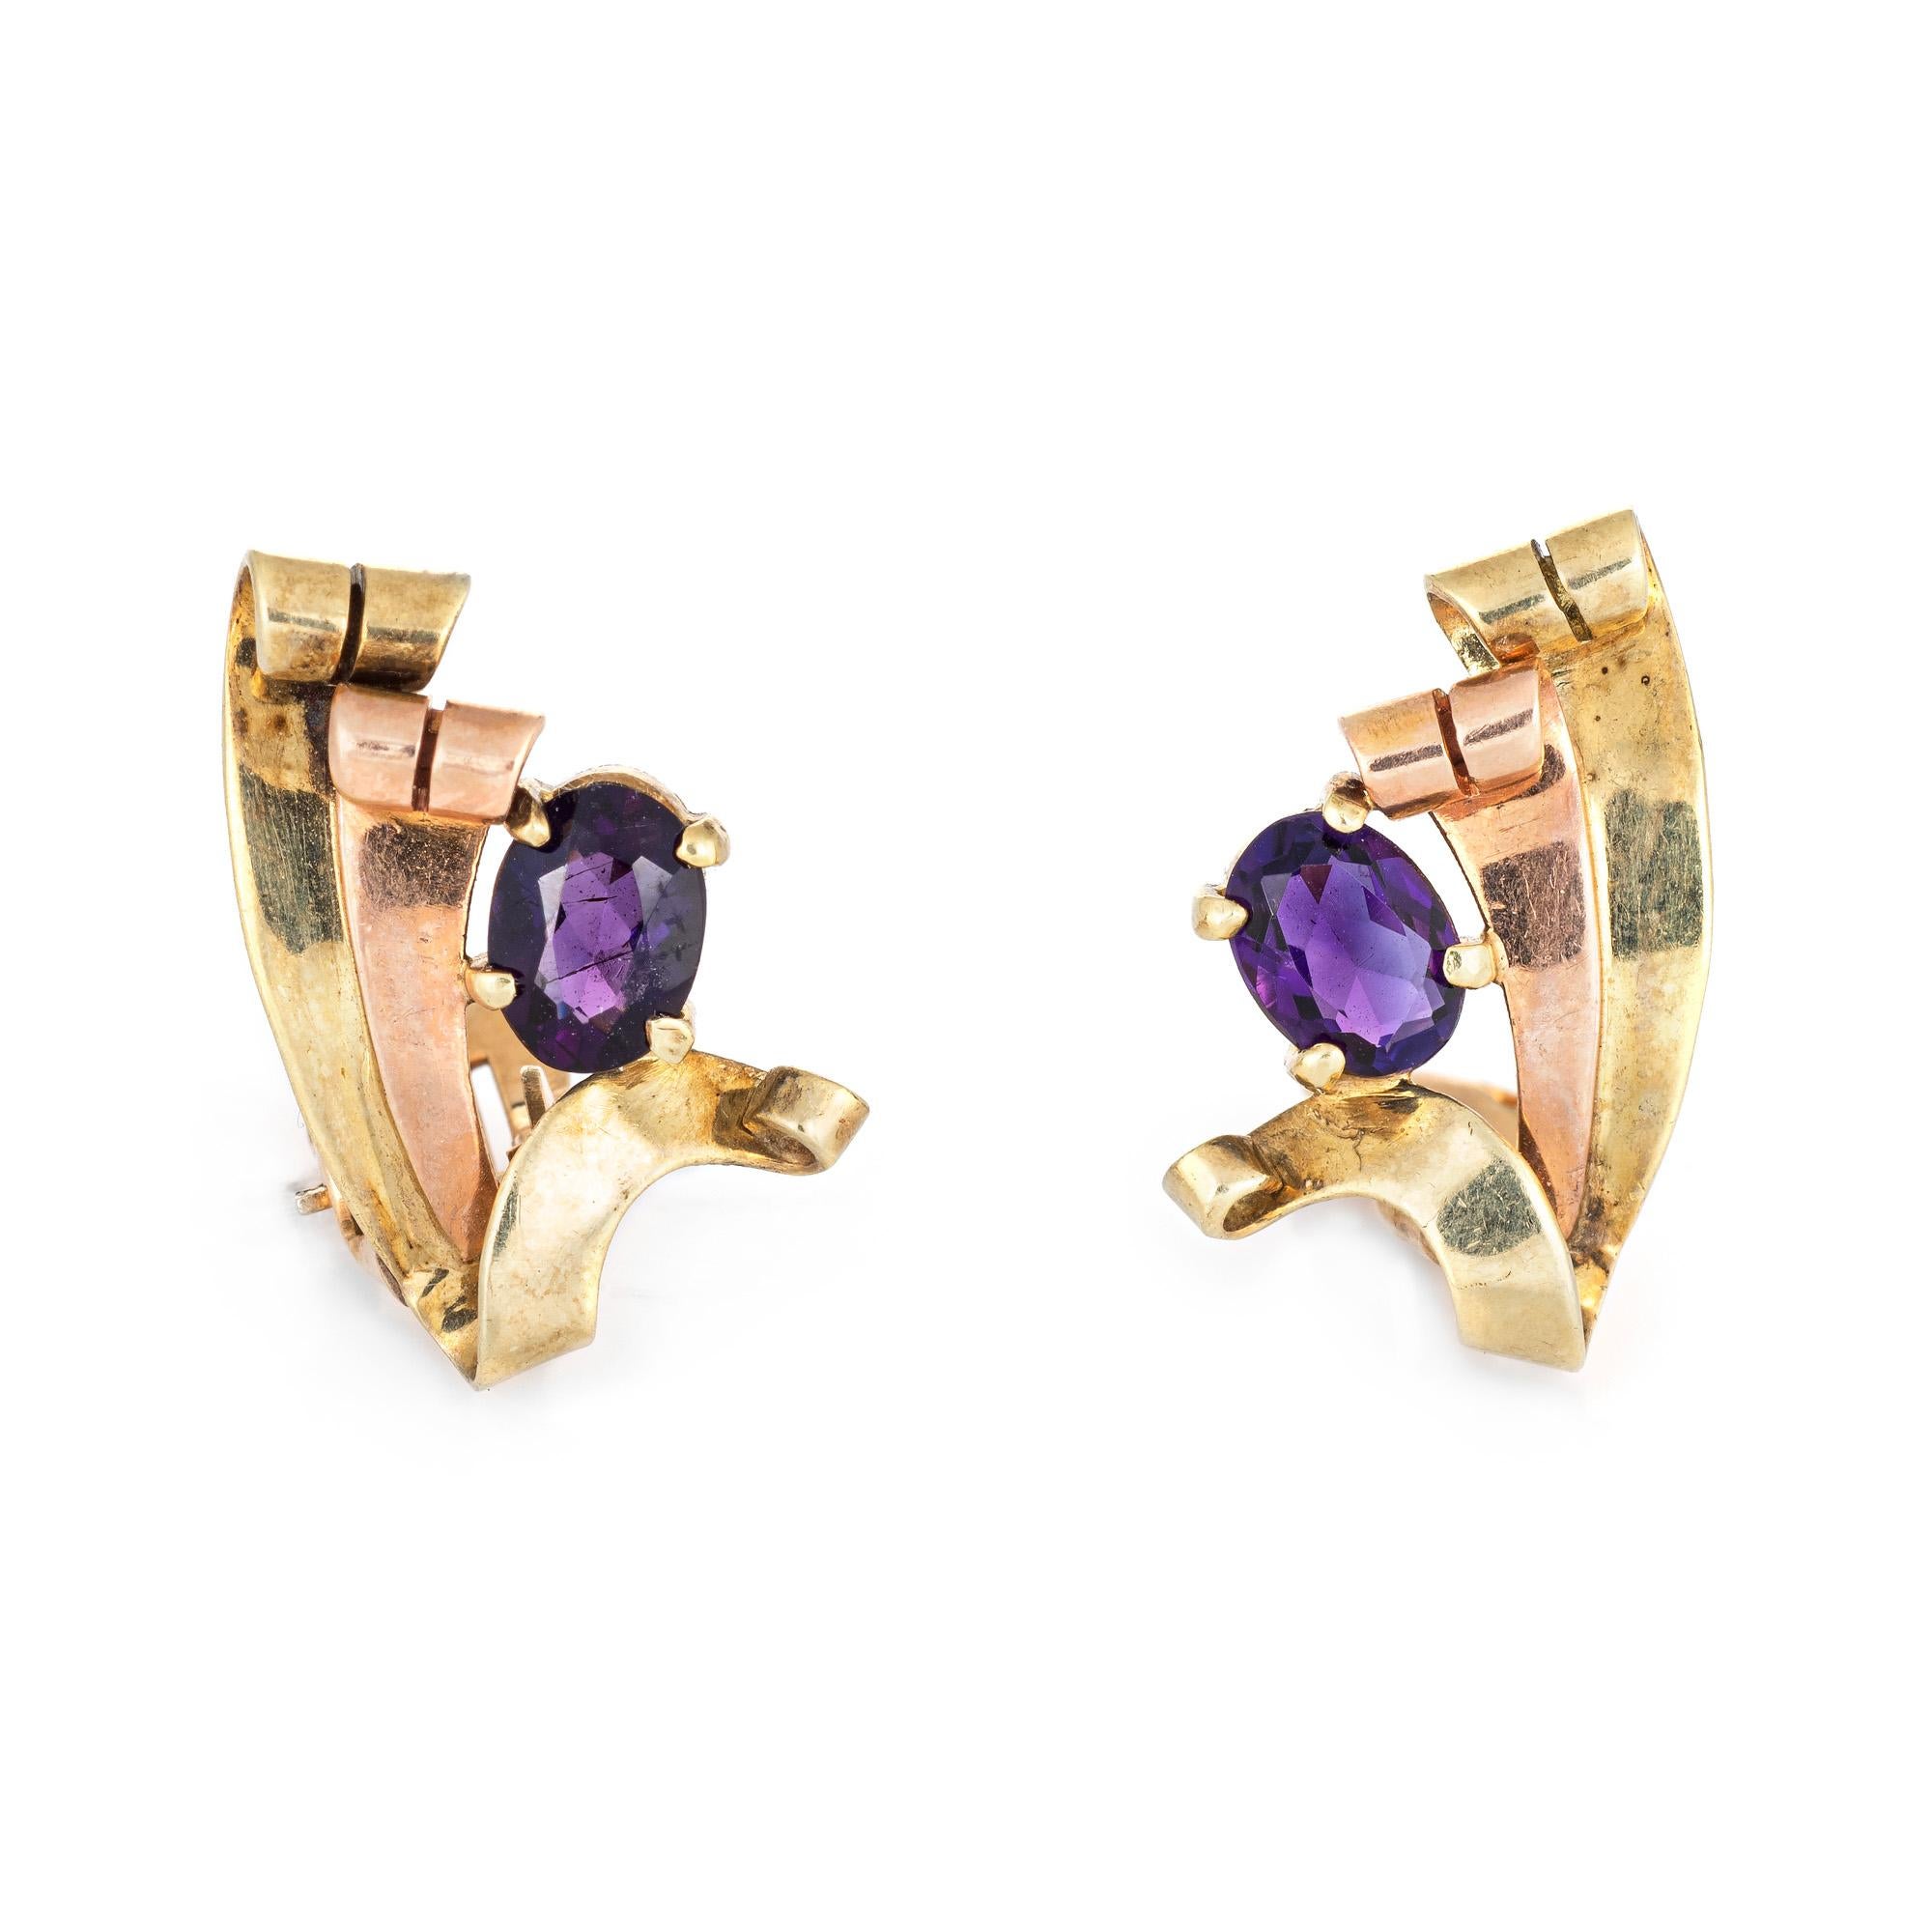 Retro Vintage Amethyst Earrings 14k Yellow Rose Gold Clip On Estate Fine Jewelry In Good Condition For Sale In Torrance, CA